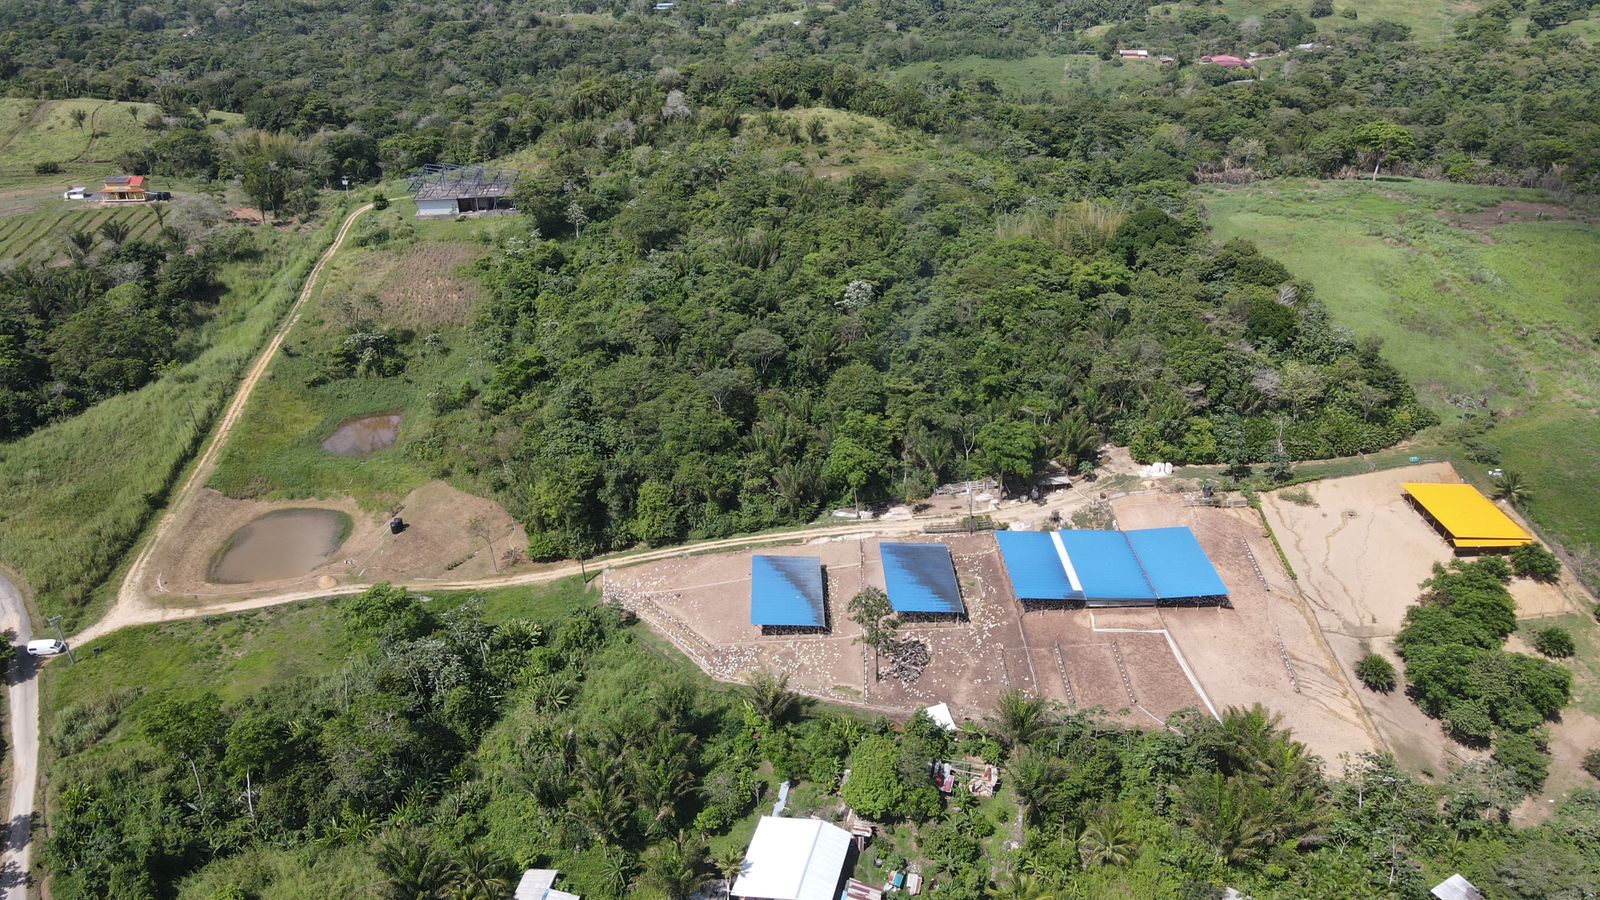 Agricultural Business on 15 Acres Piparo $18,000,000